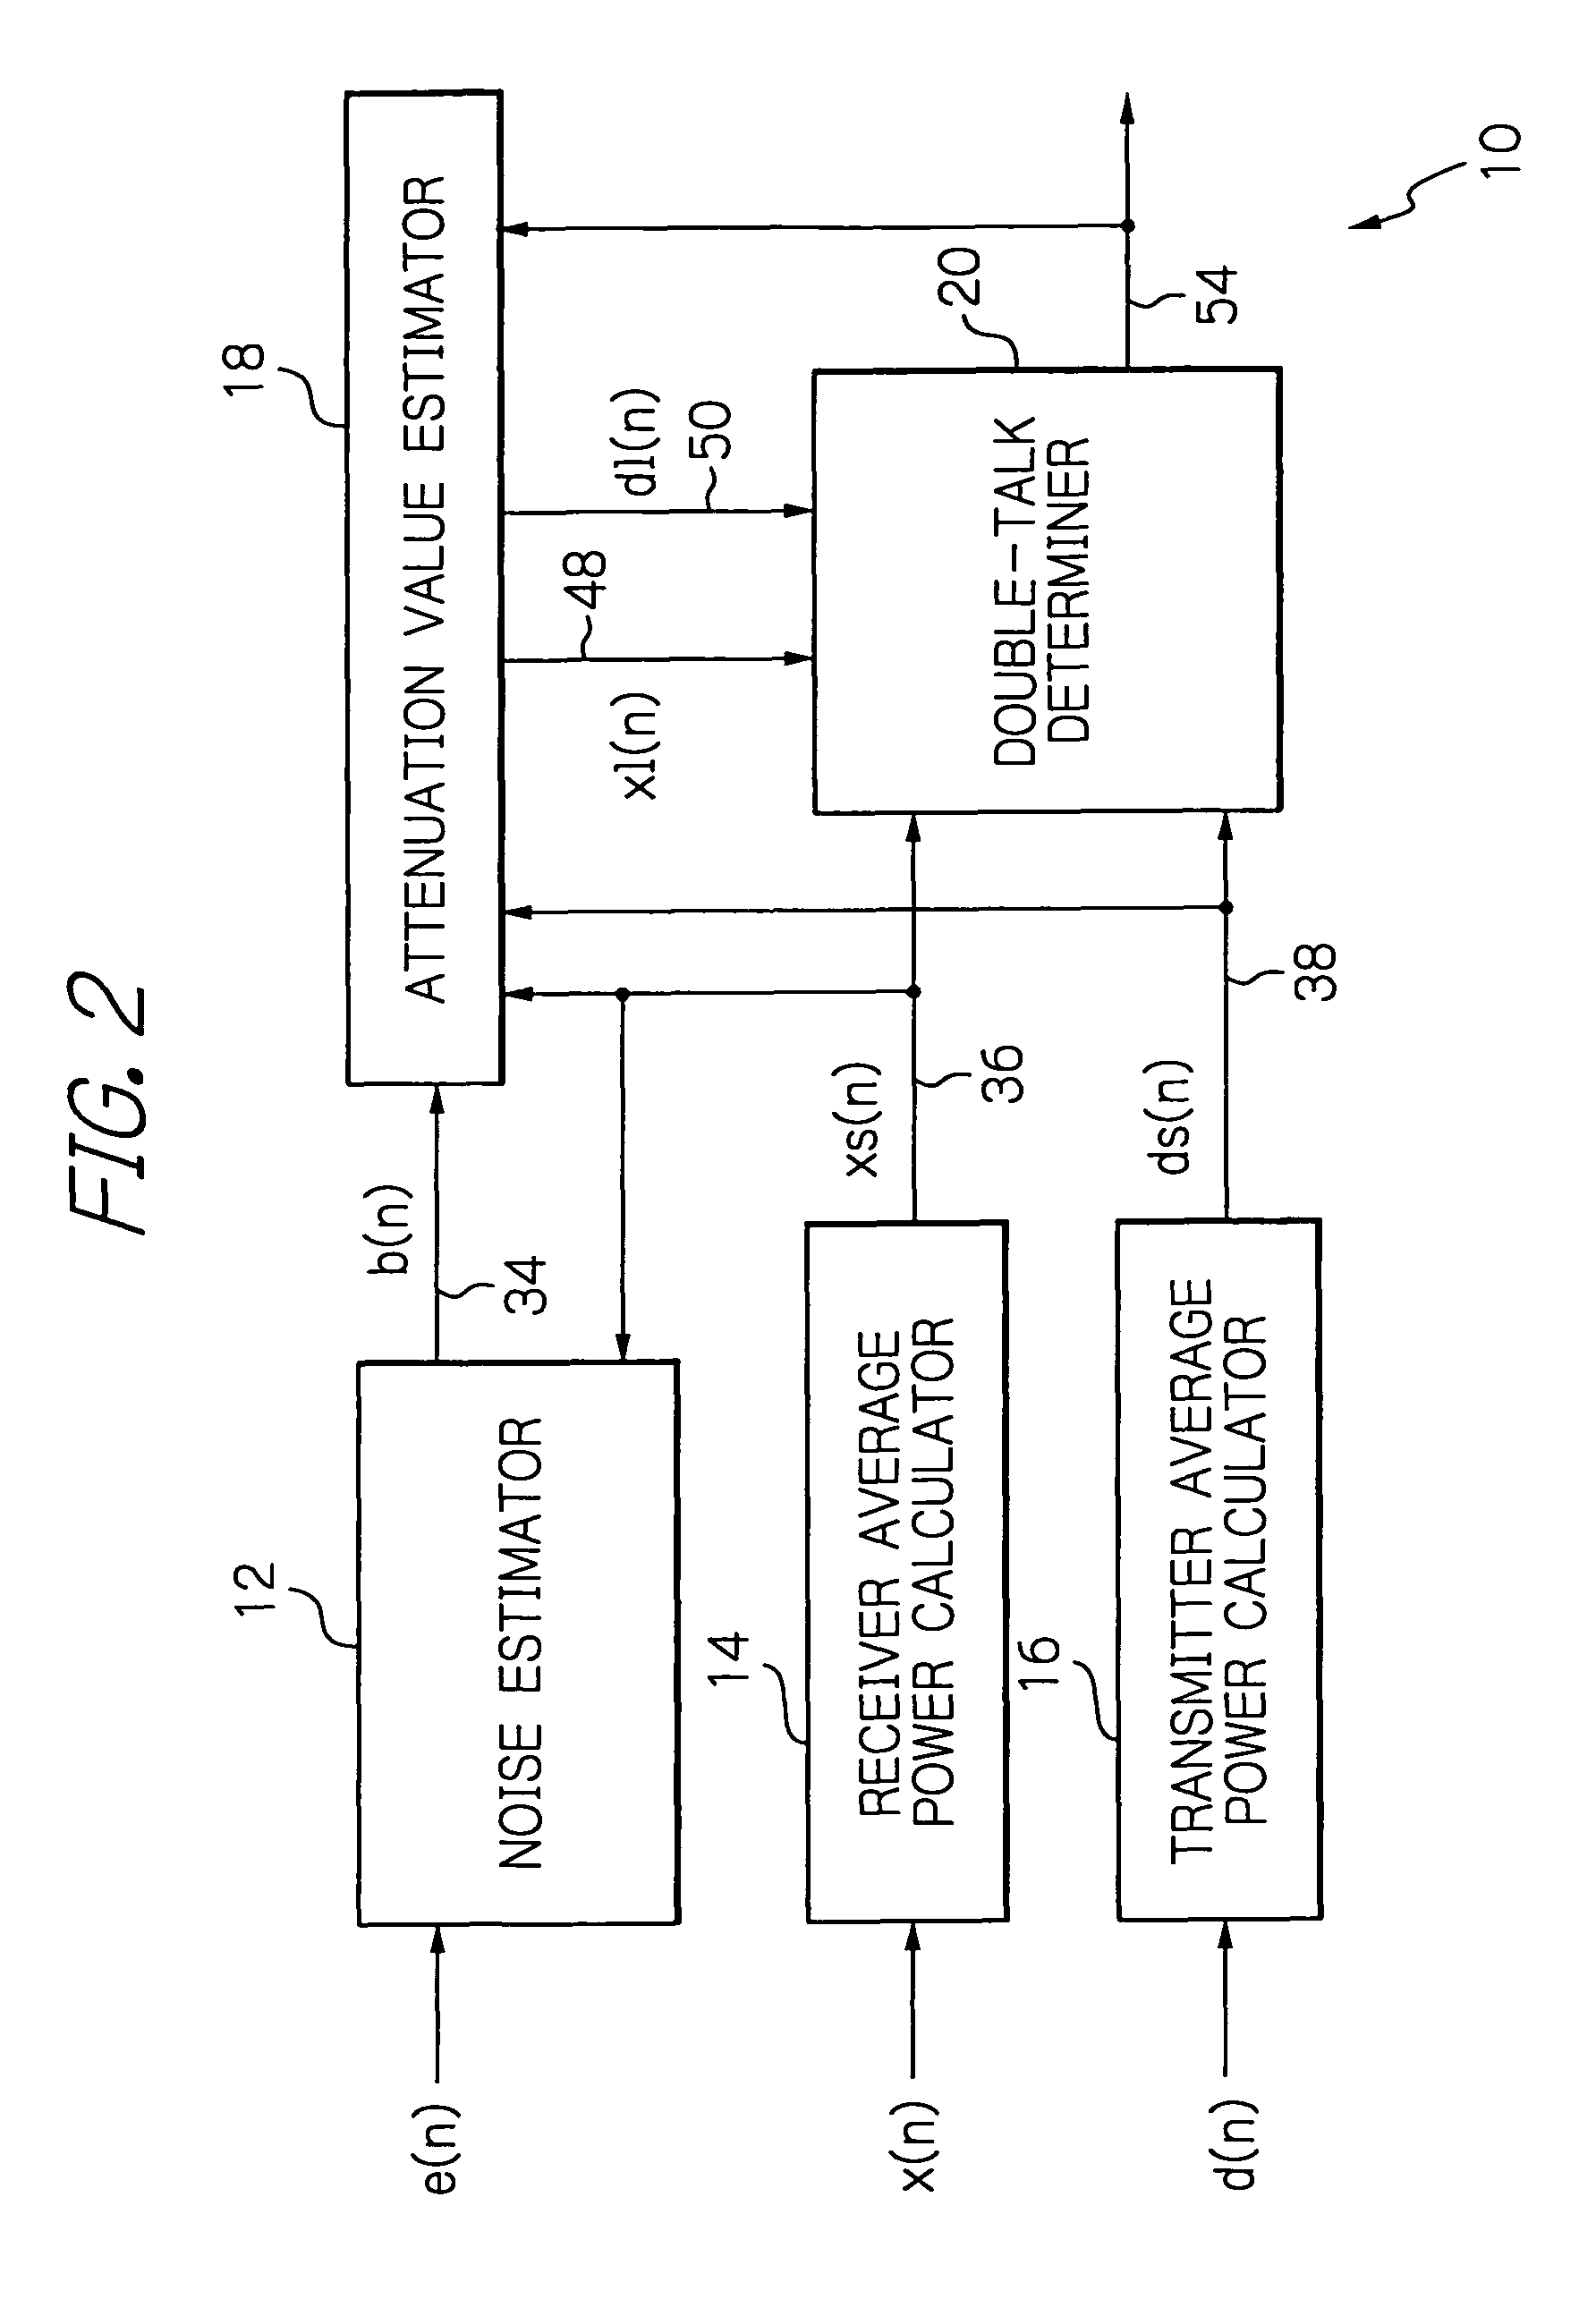 Double-talk detector with accuracy and speed of detection improved and a method therefor